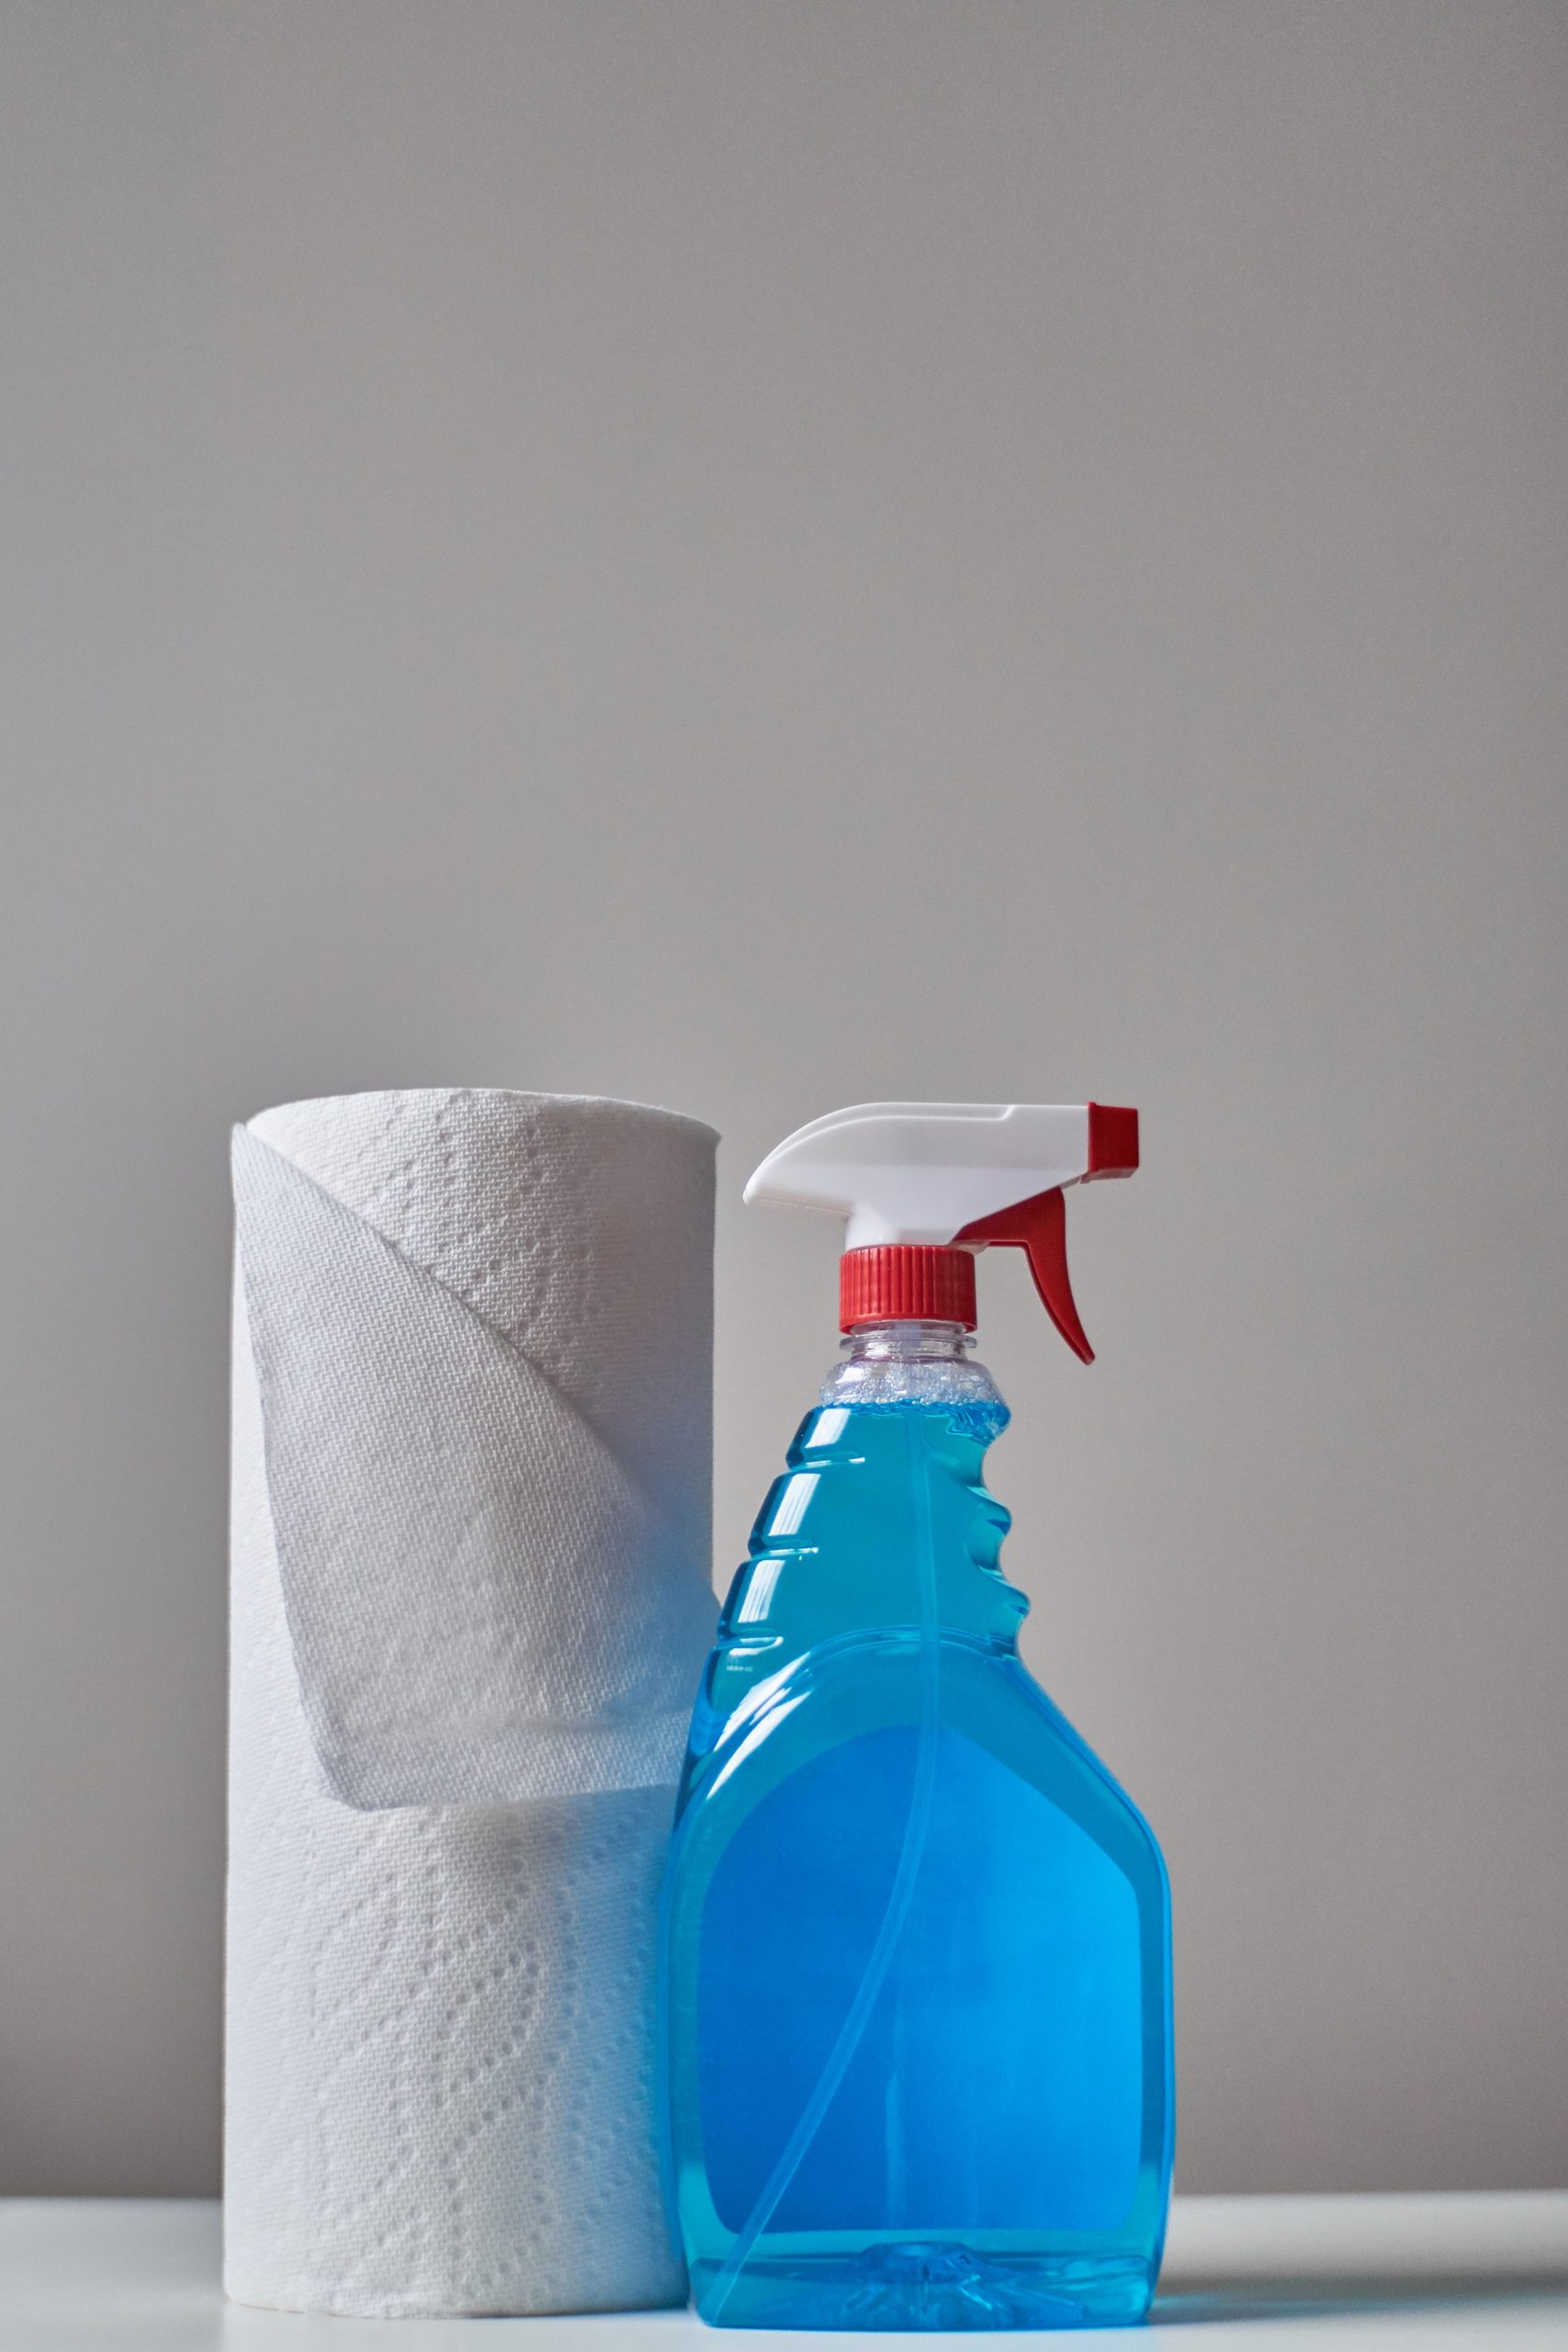 Spray bottle filled with cleaning spray and a roll of paper towels on the side.